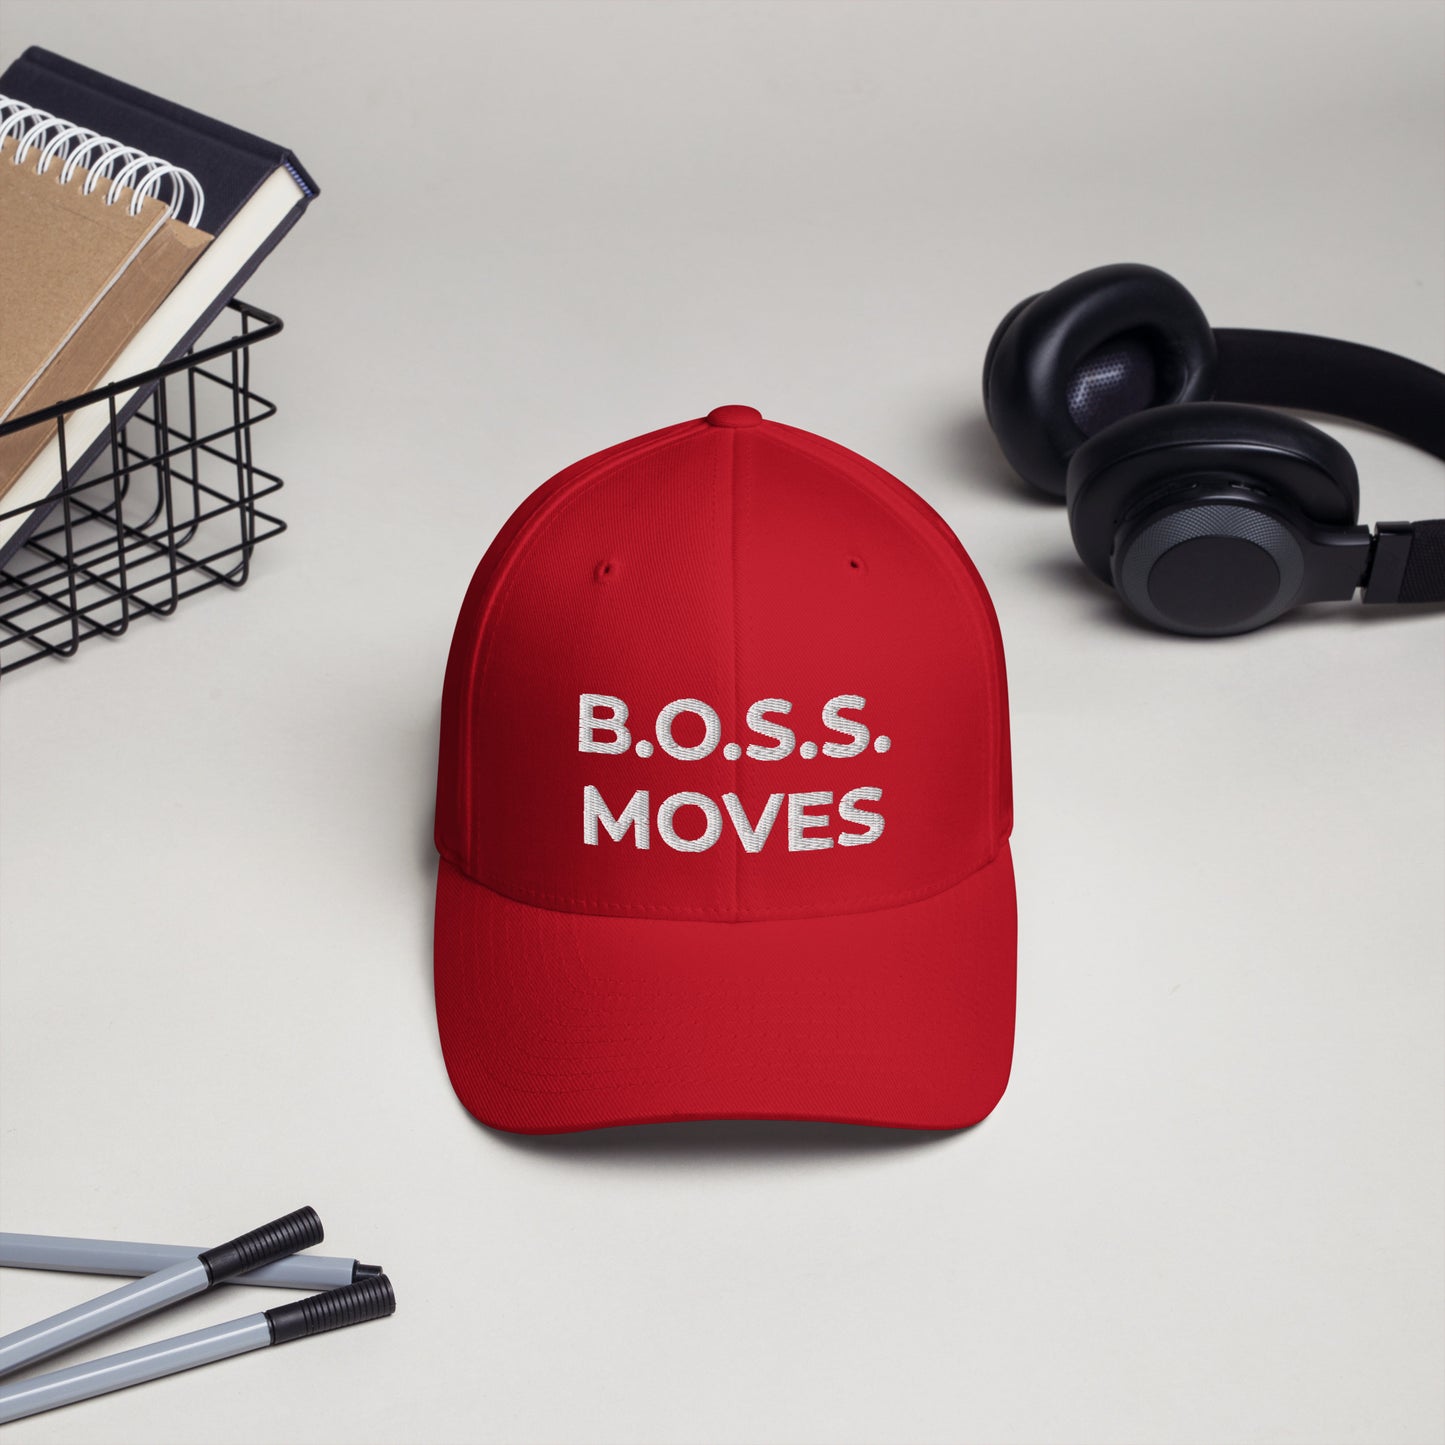 B.O.S.S. MOVES by Myron Golden